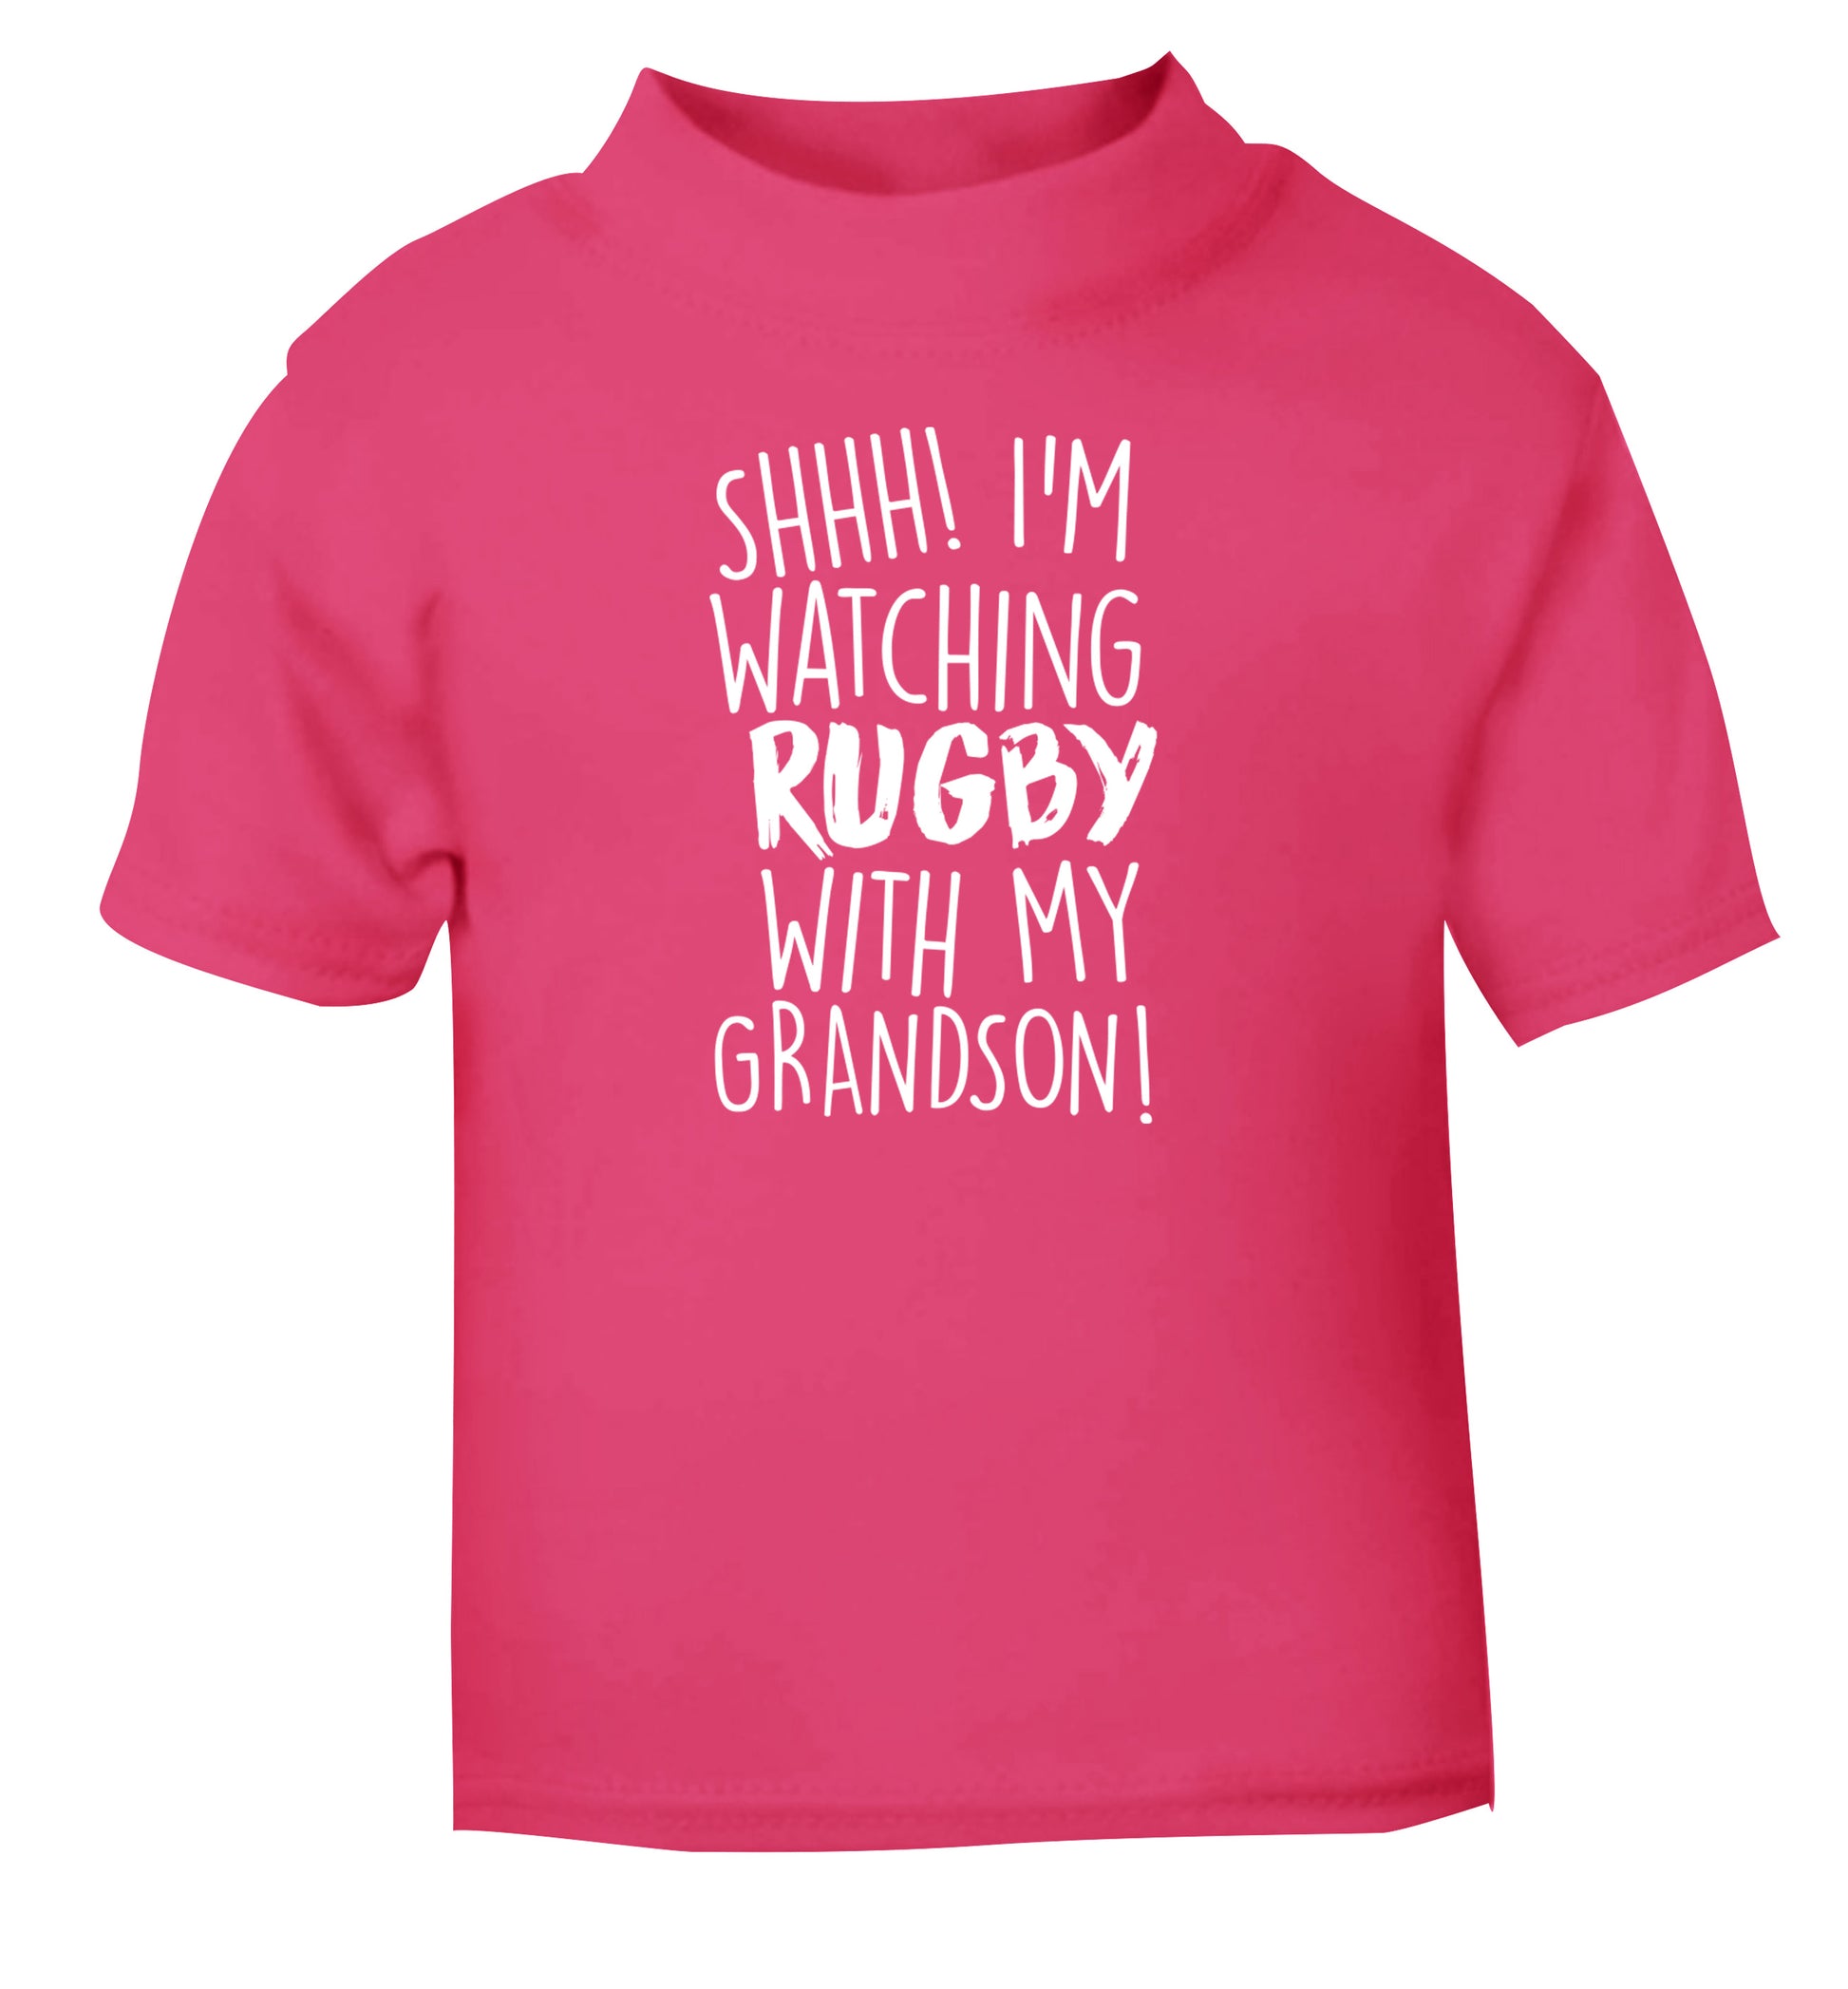 Shh I'm watching rugby with my grandson pink Baby Toddler Tshirt 2 Years